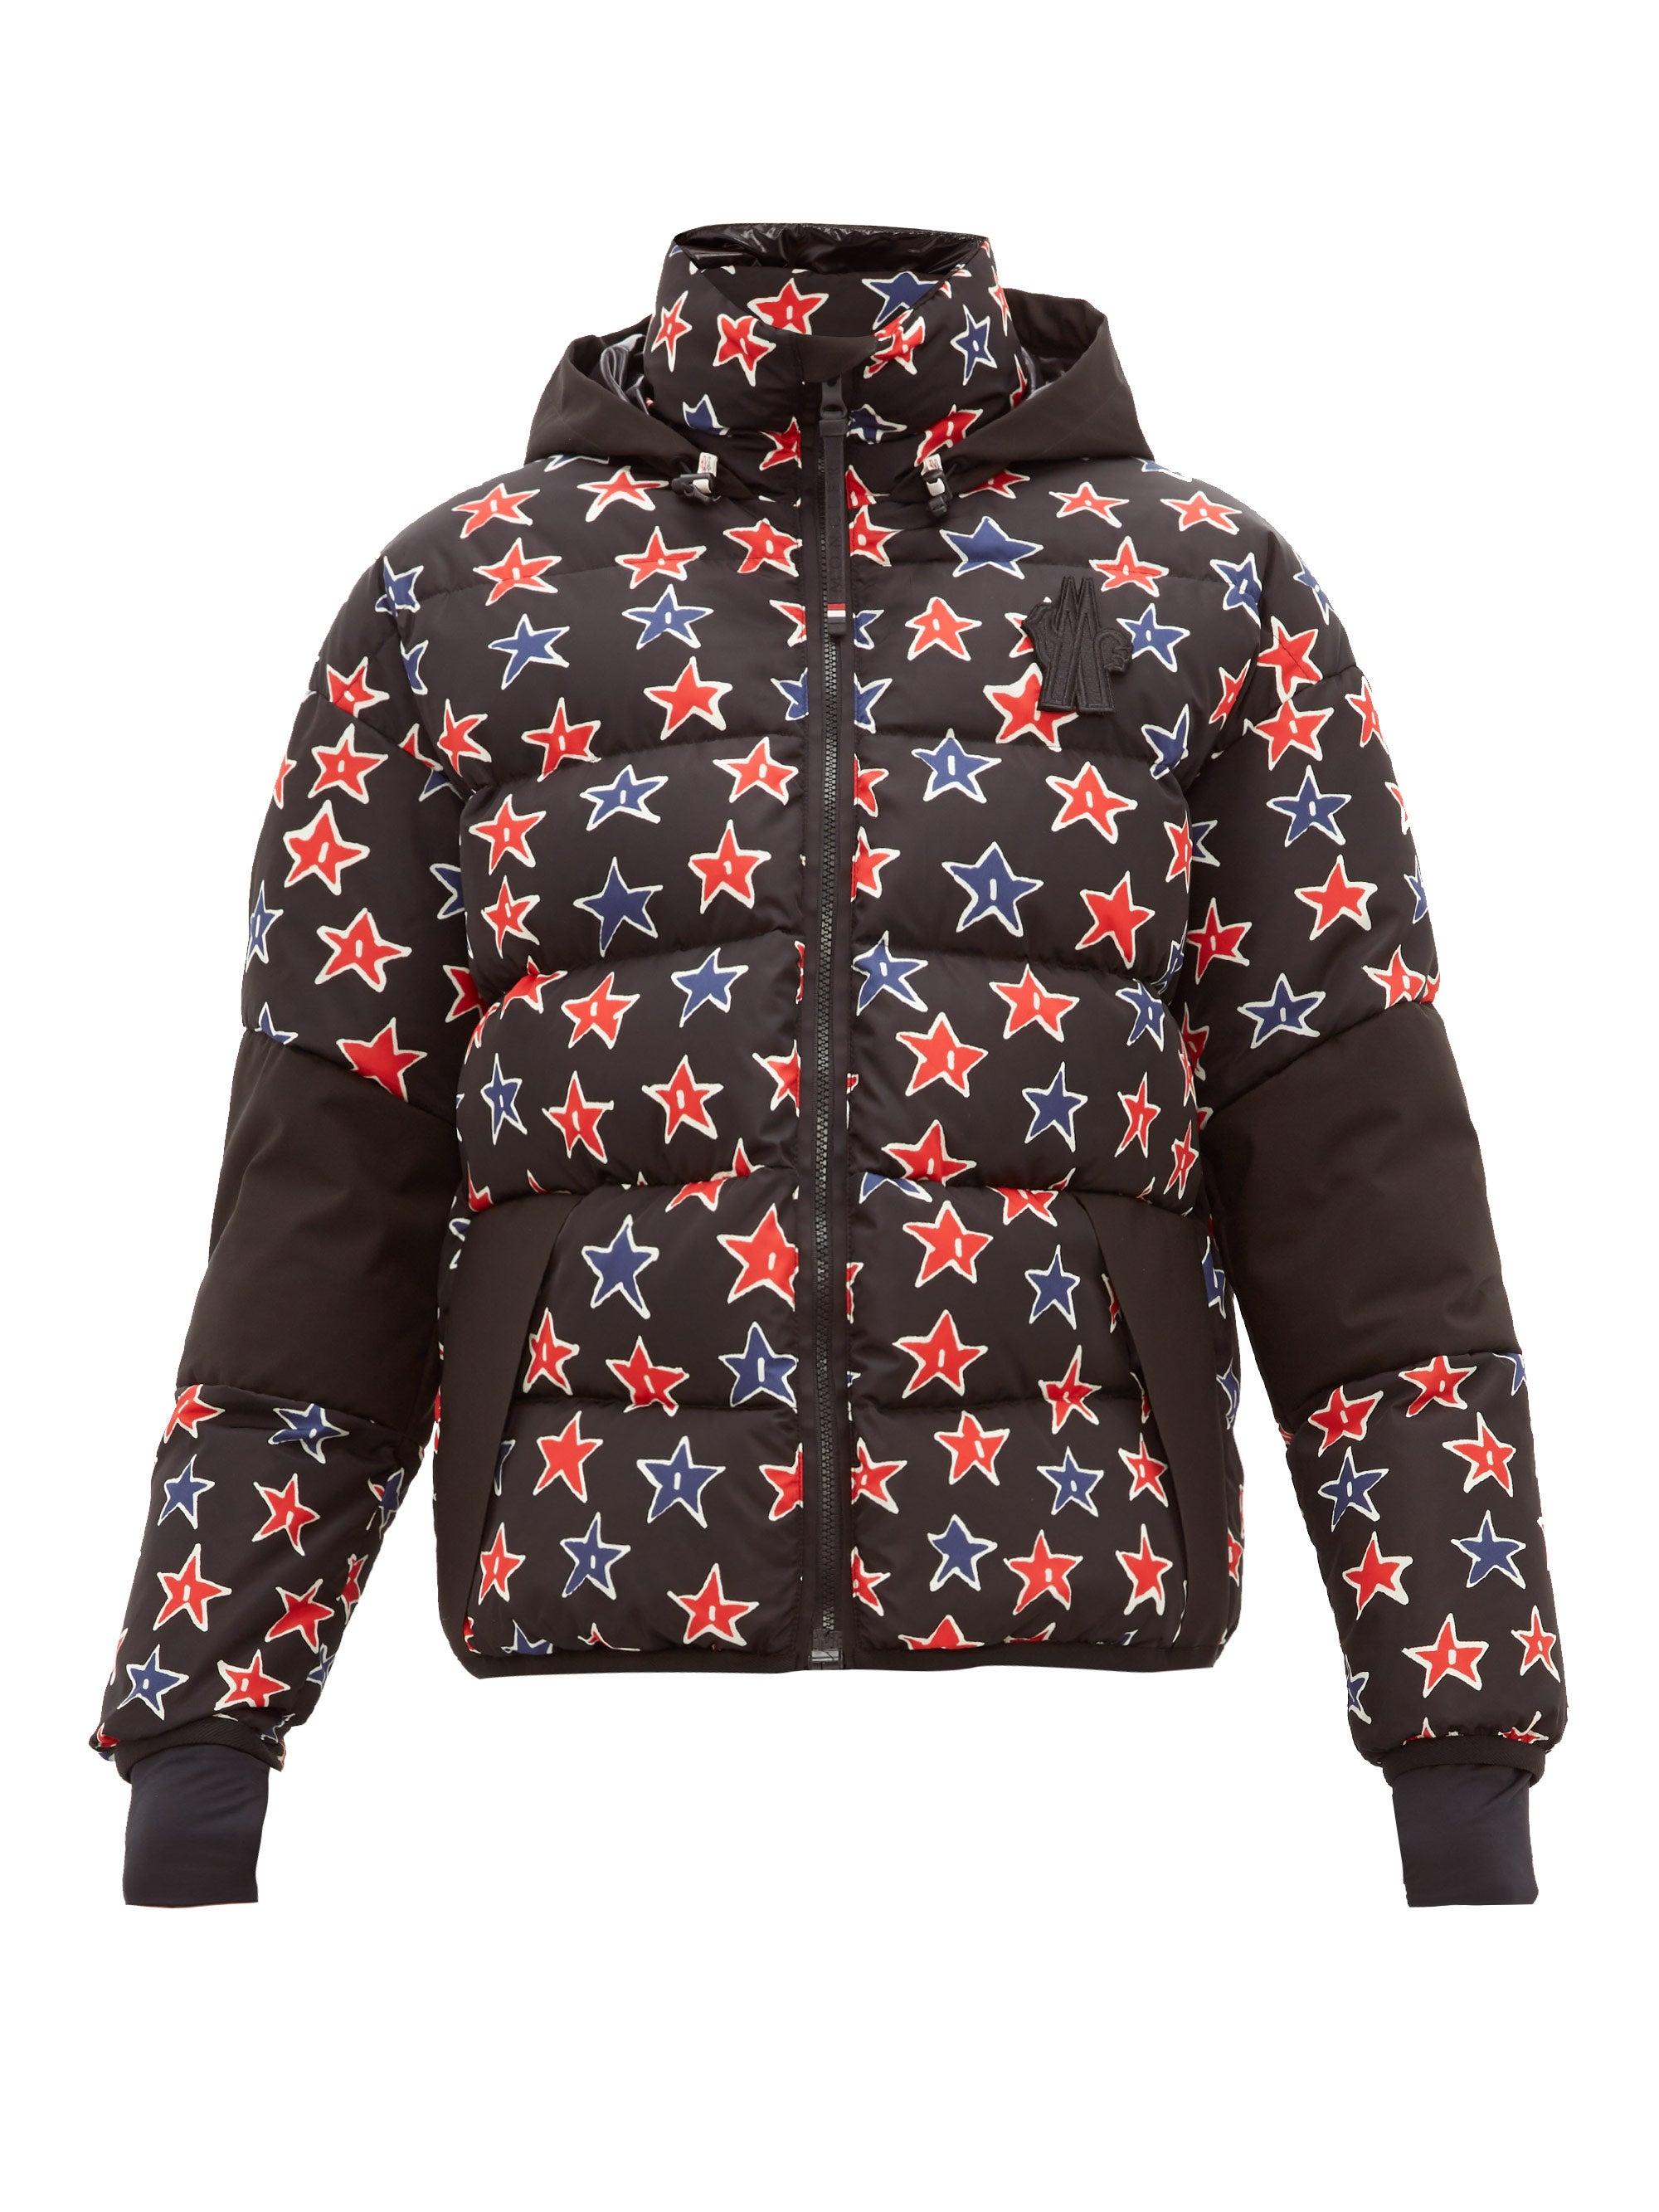 3 MONCLER GRENOBLE Star-print Quilted Down Technical Ski Jacket in ...